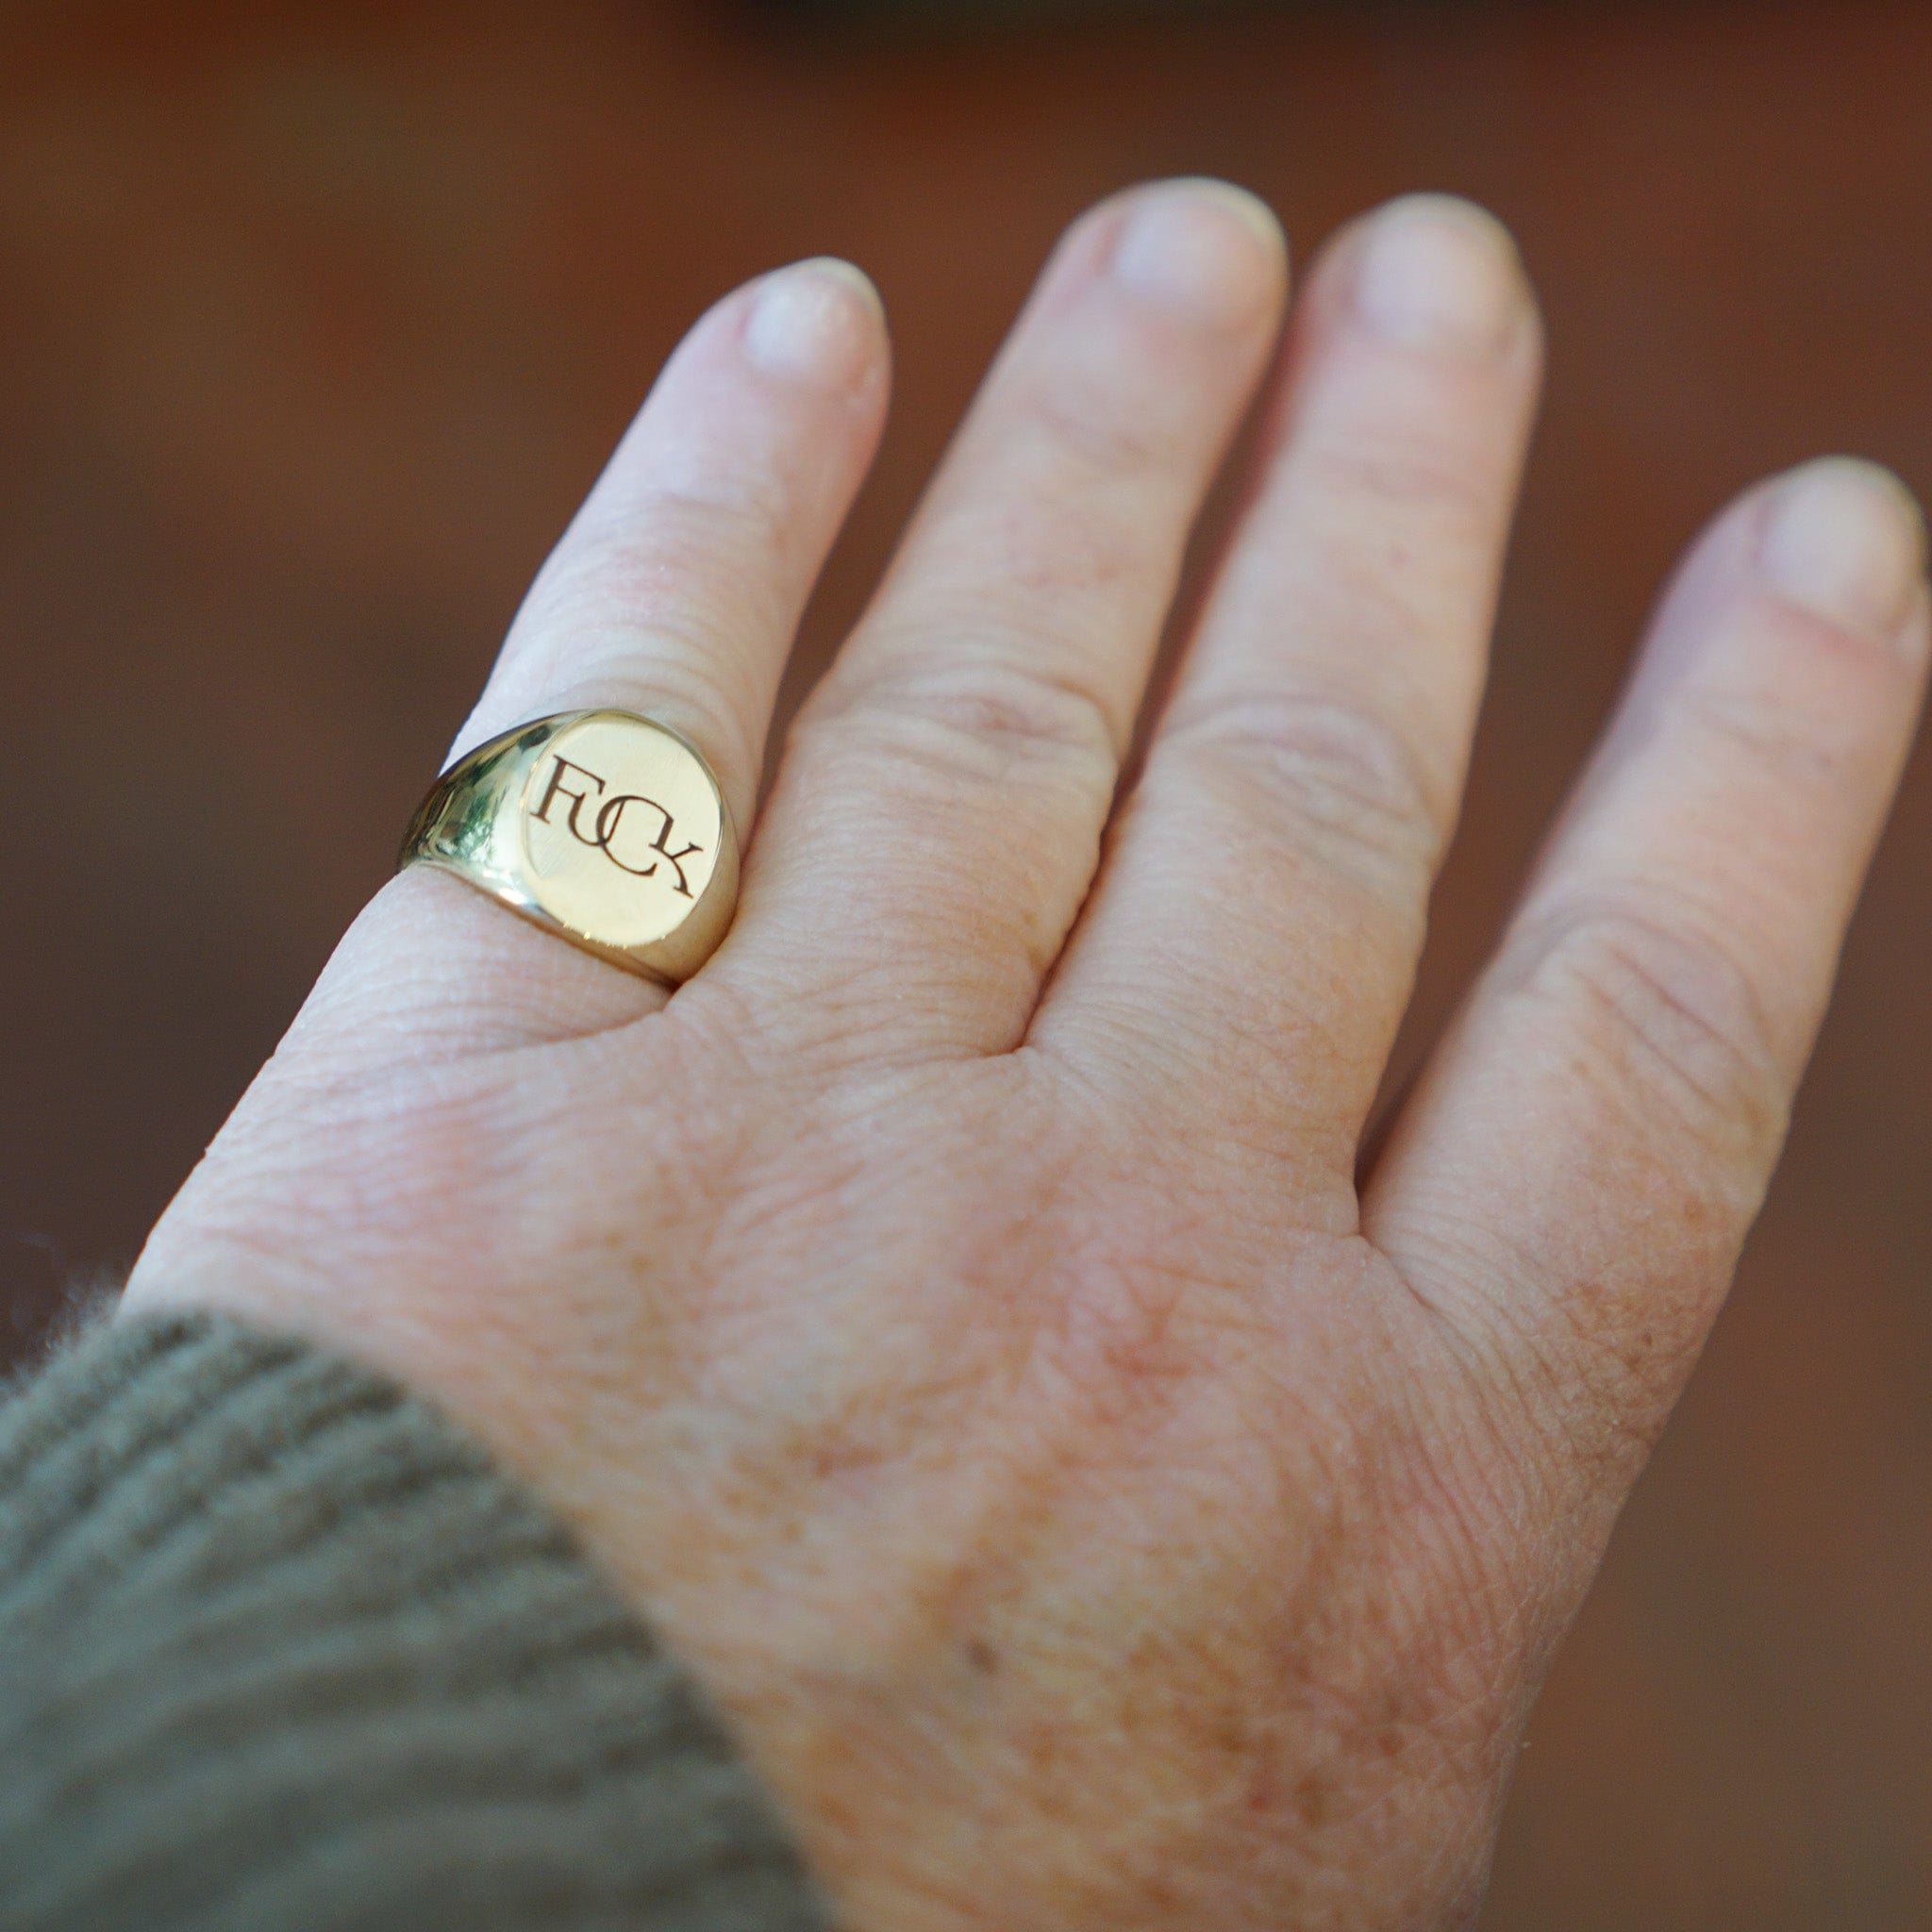 Marion Cage Jewelry Small / 6.5 Bronze Signet F*ck Ring | 2 Sizes